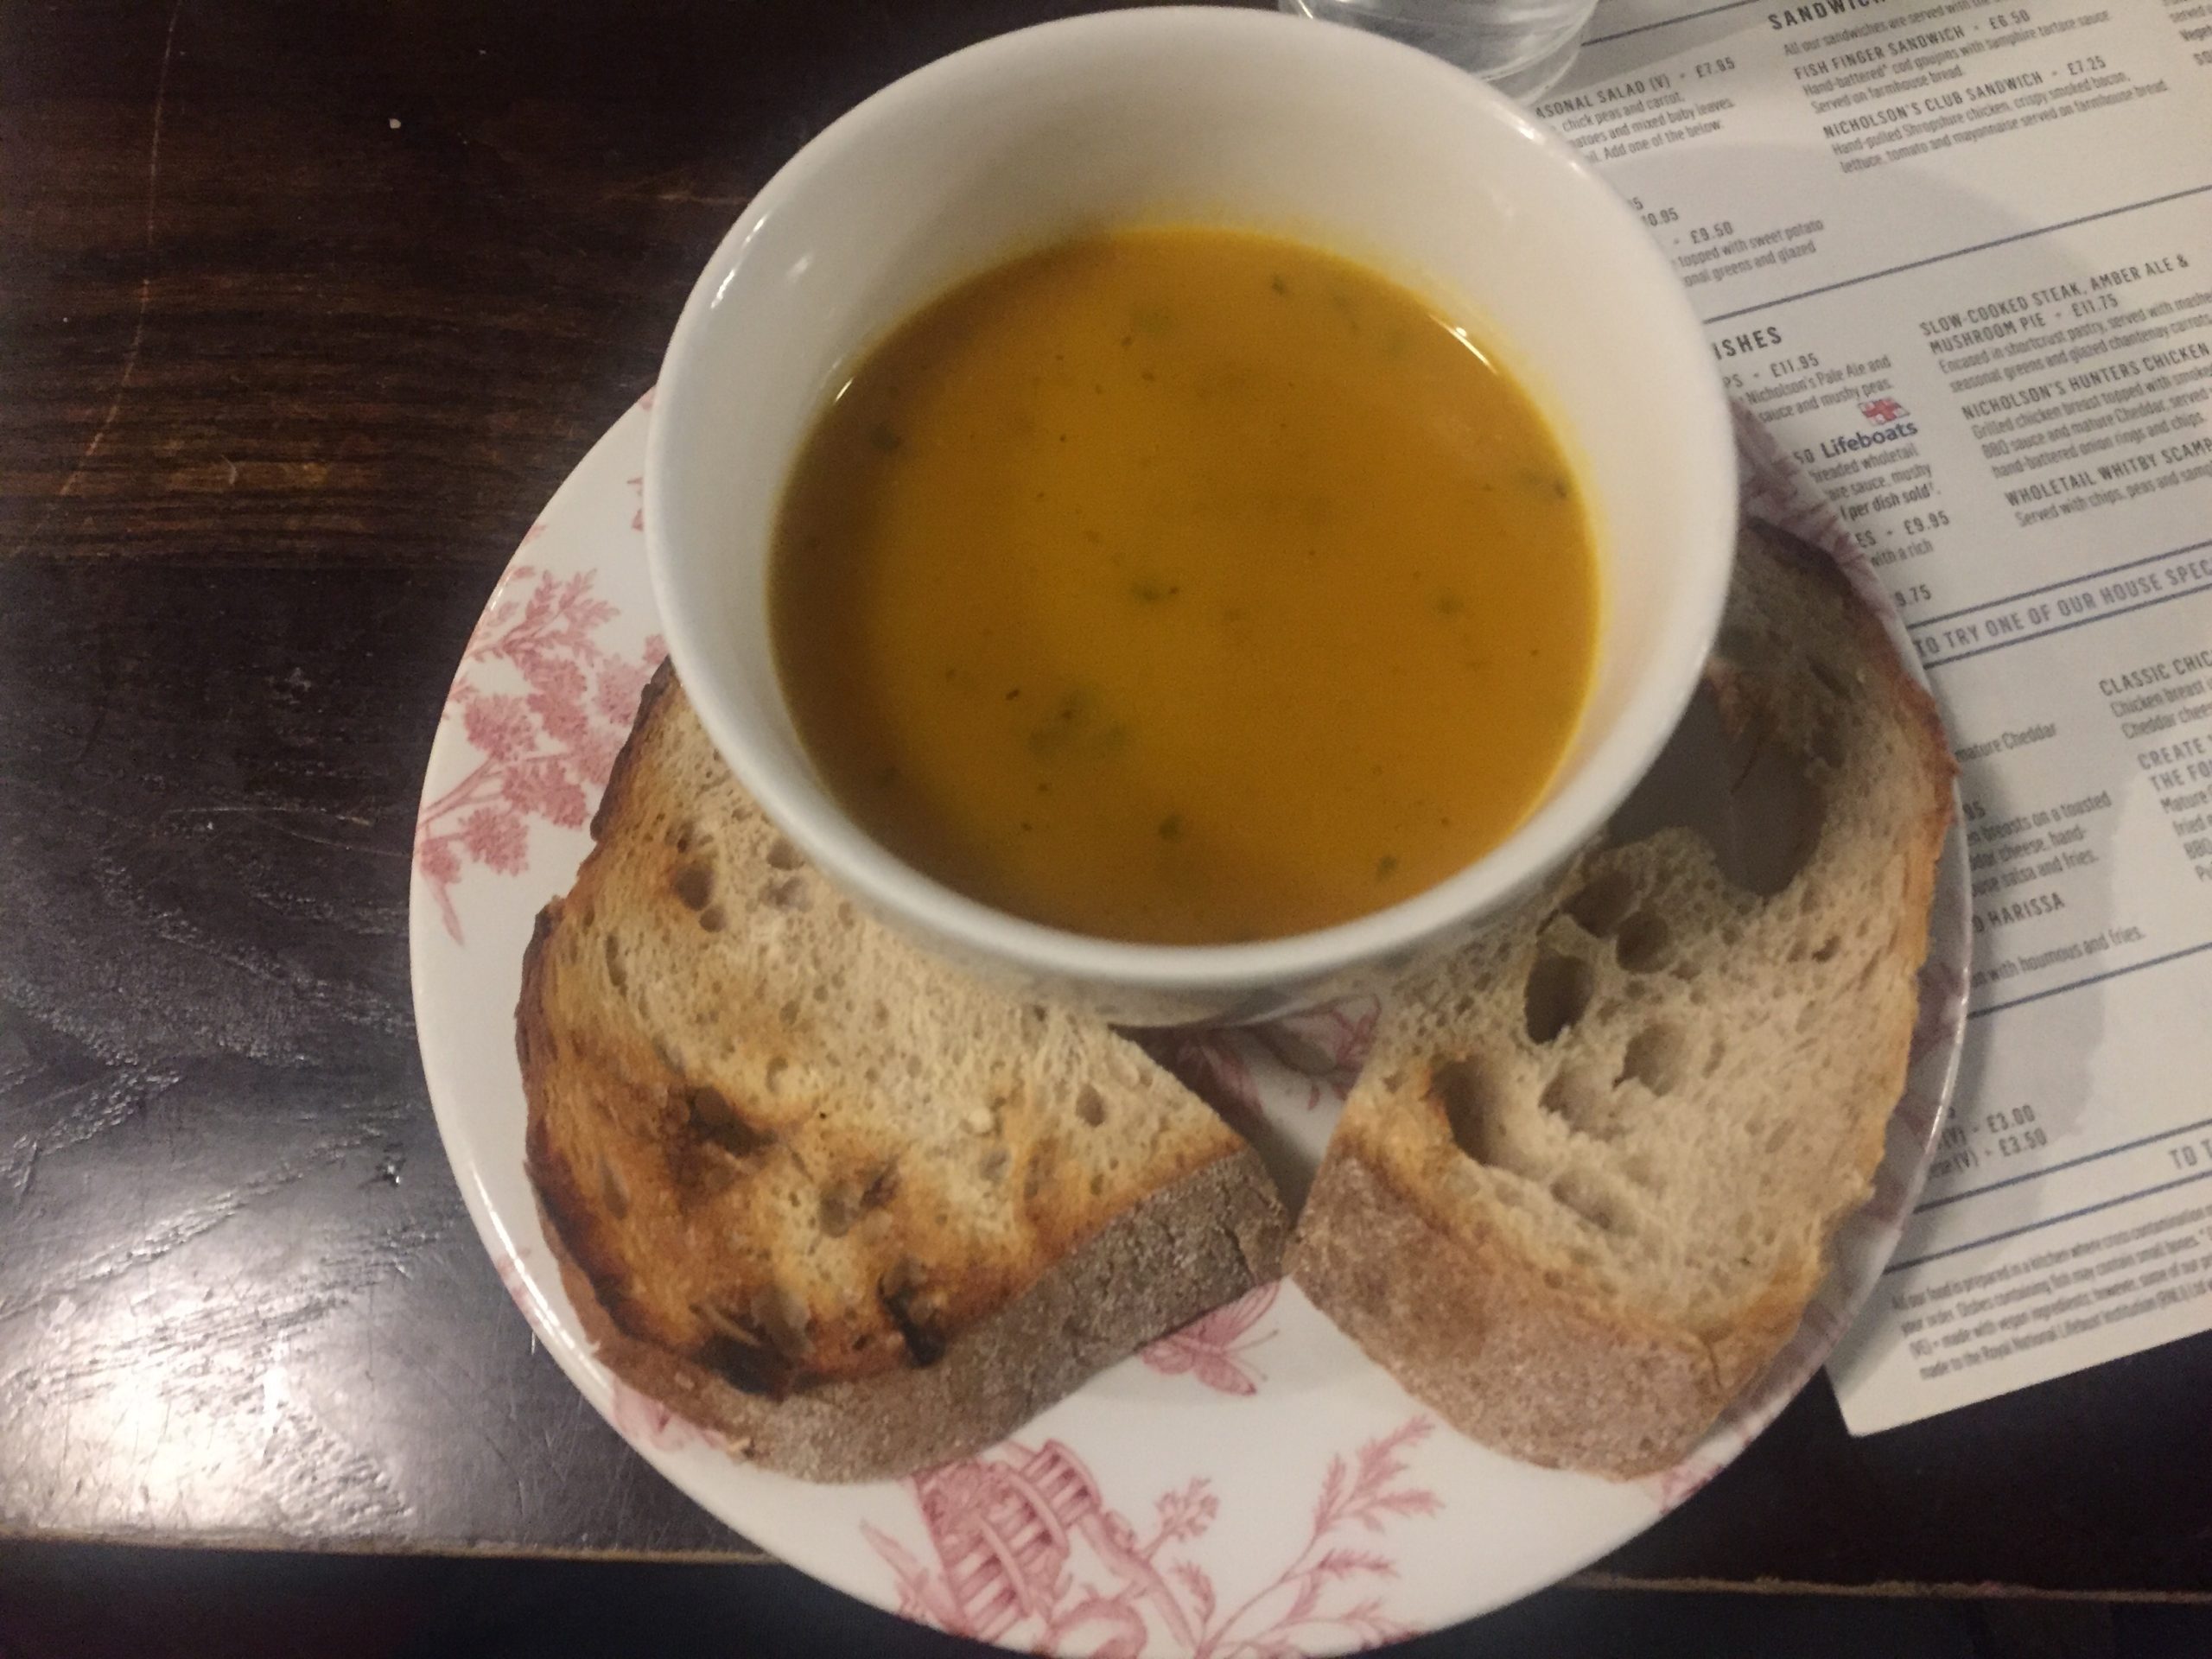 Vegetable soup at The Eagle & Child